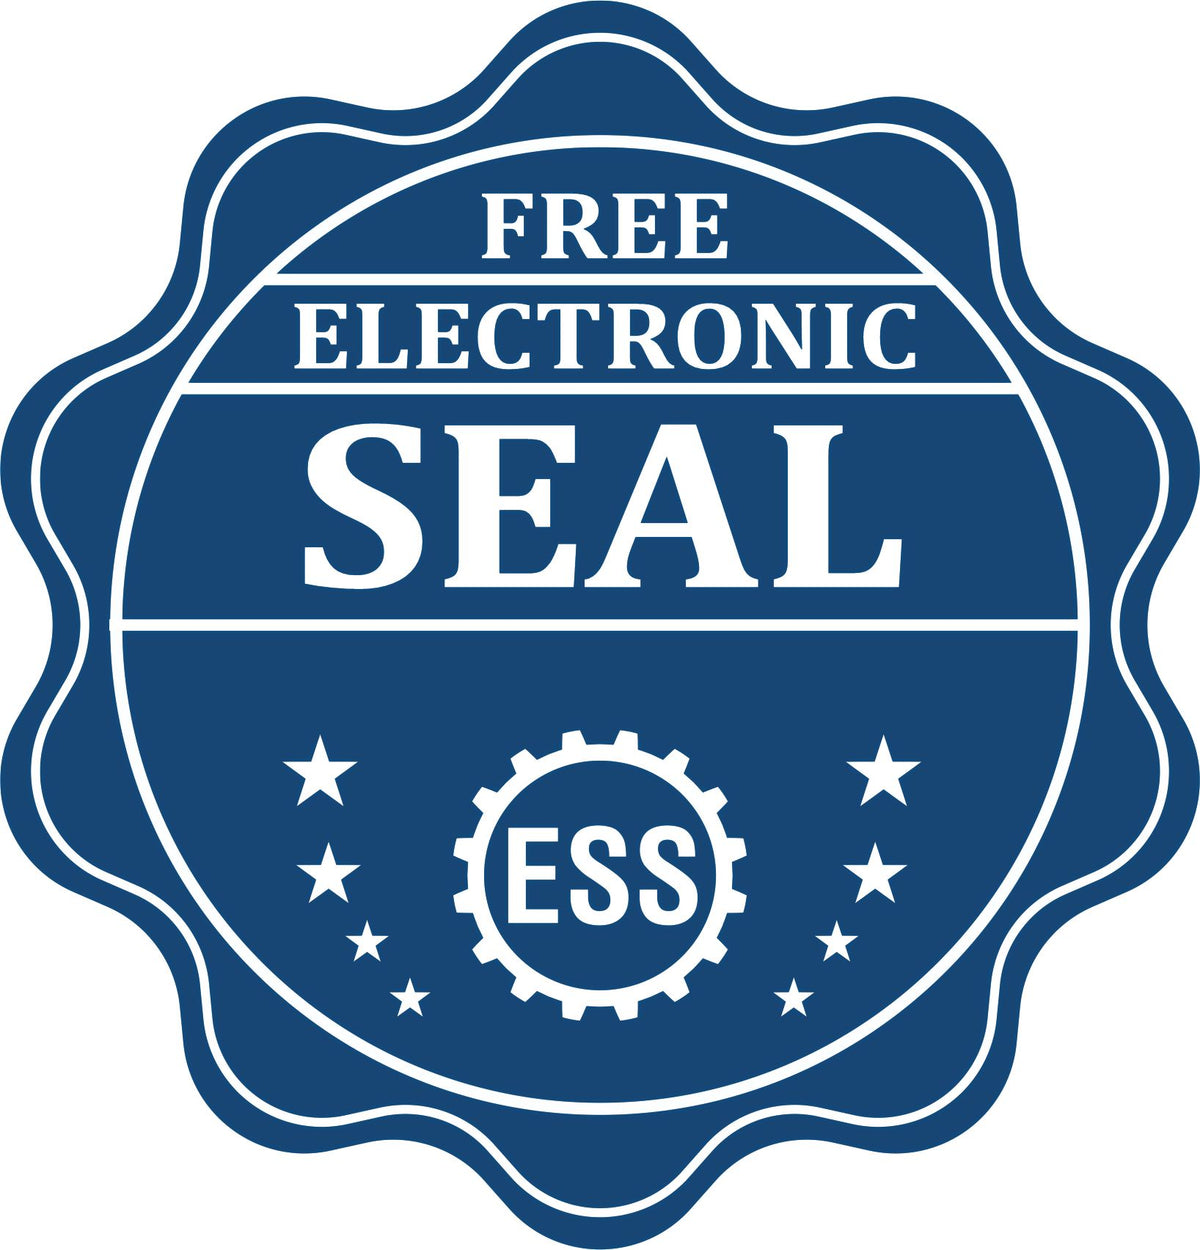 A badge showing a free electronic seal for the State of Nevada Long Reach Architectural Embossing Seal with stars and the ESS gear on the emblem.